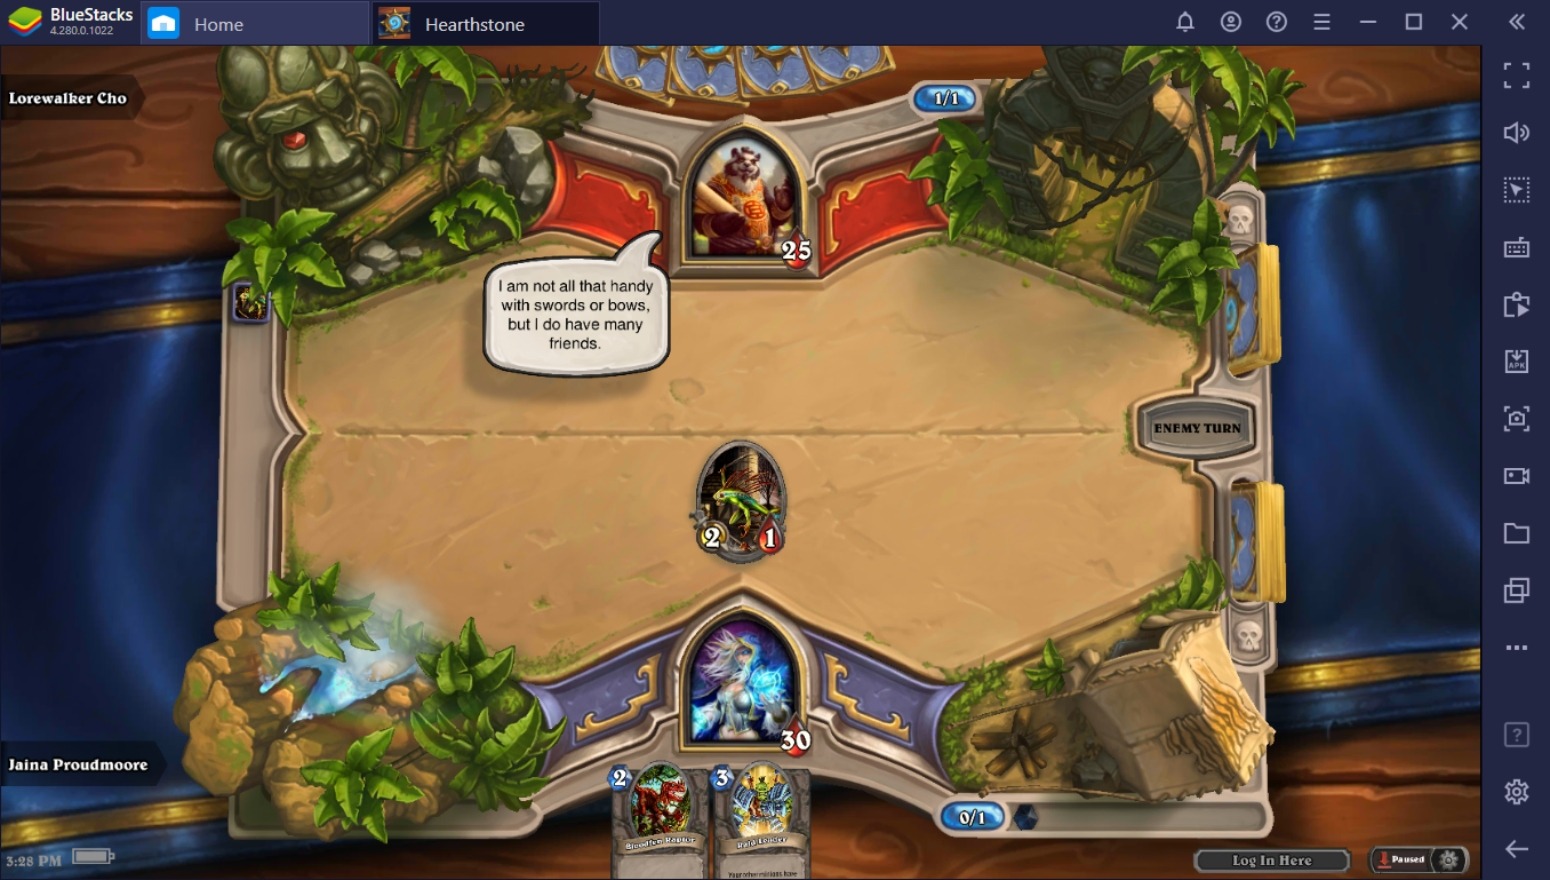 How to Play Hearthstone on PC with BlueStacks